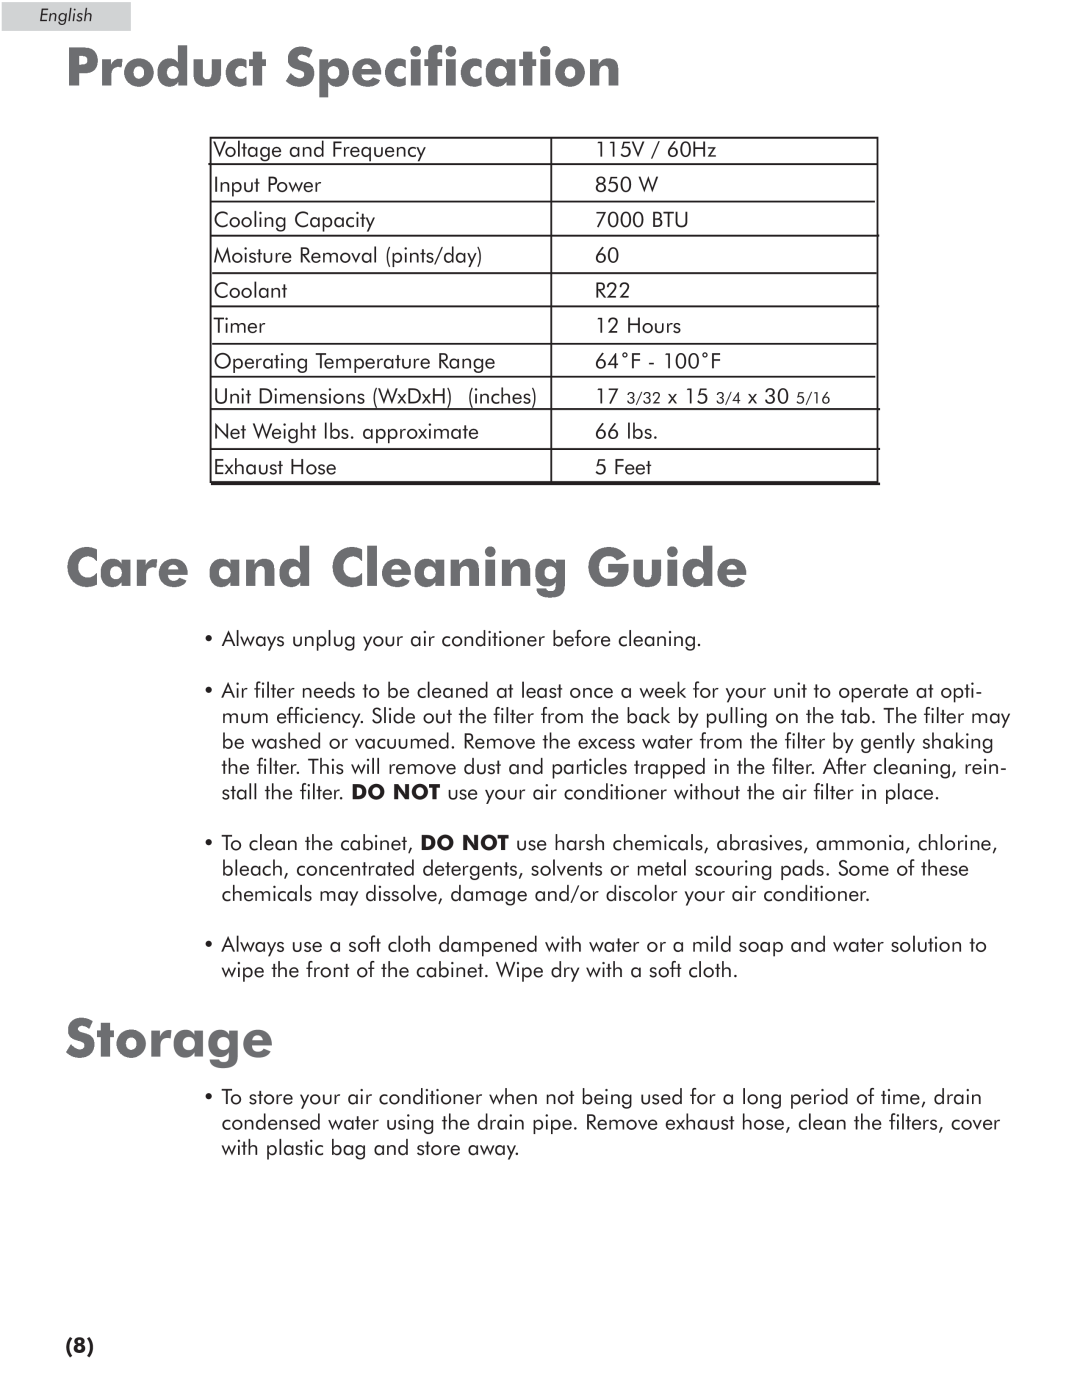 Amana AP076E manual Product Specification, Care and Cleaning Guide, Storage 